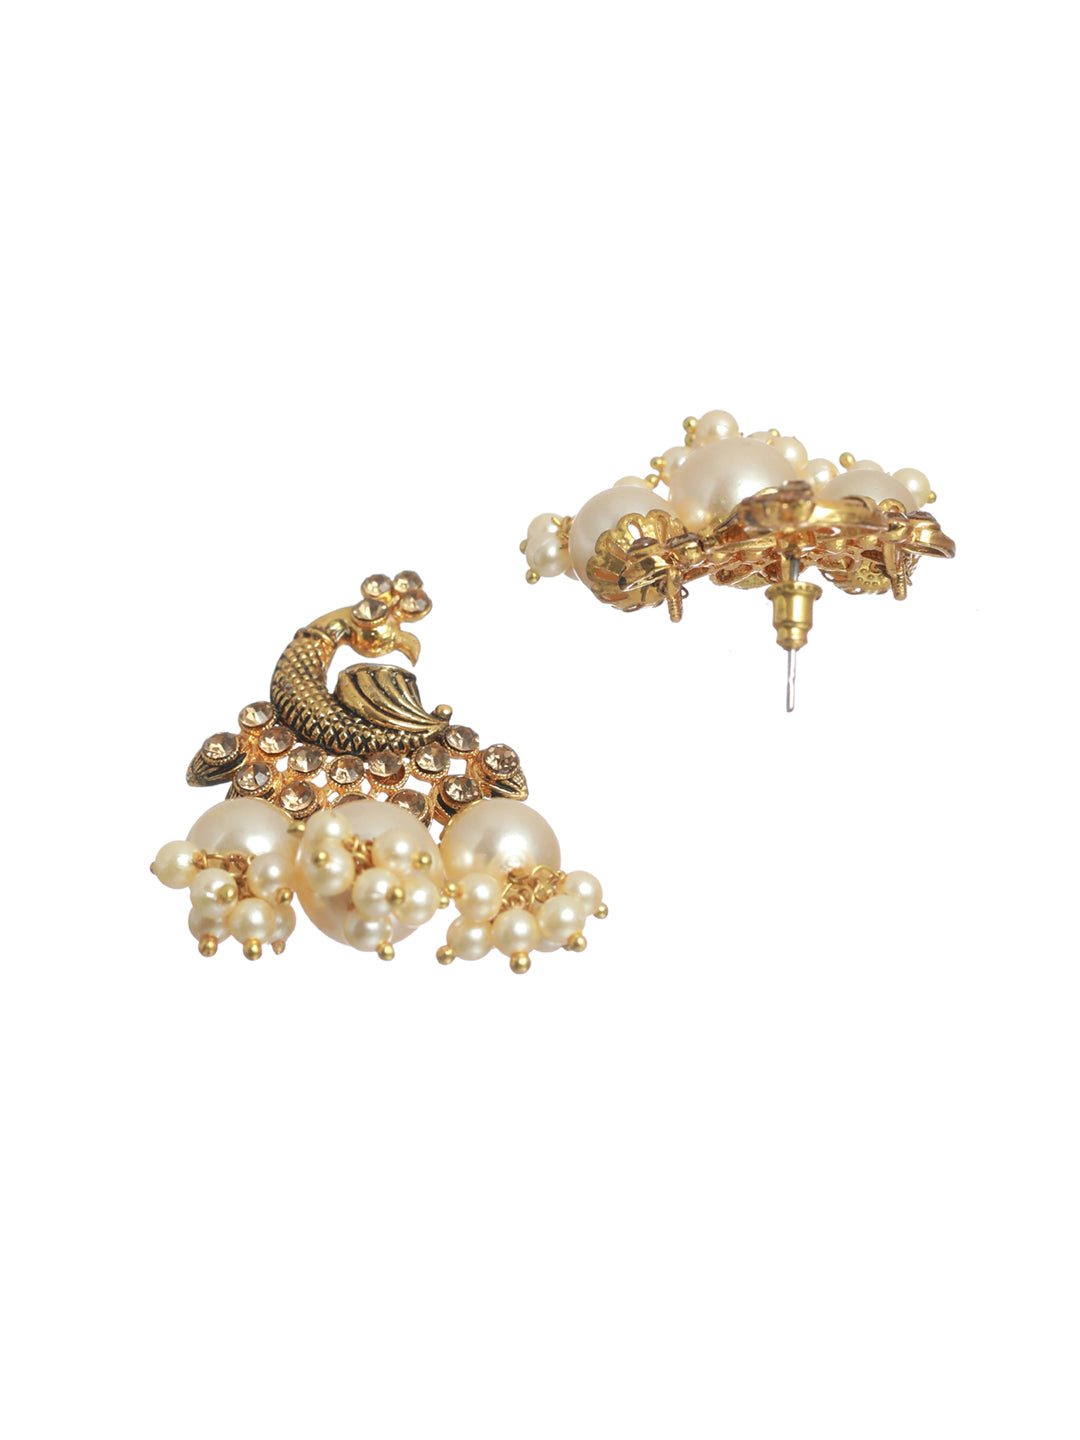 Peacock Studded Gold Plated Pearl Drop Earrings - NOZ2TOZ